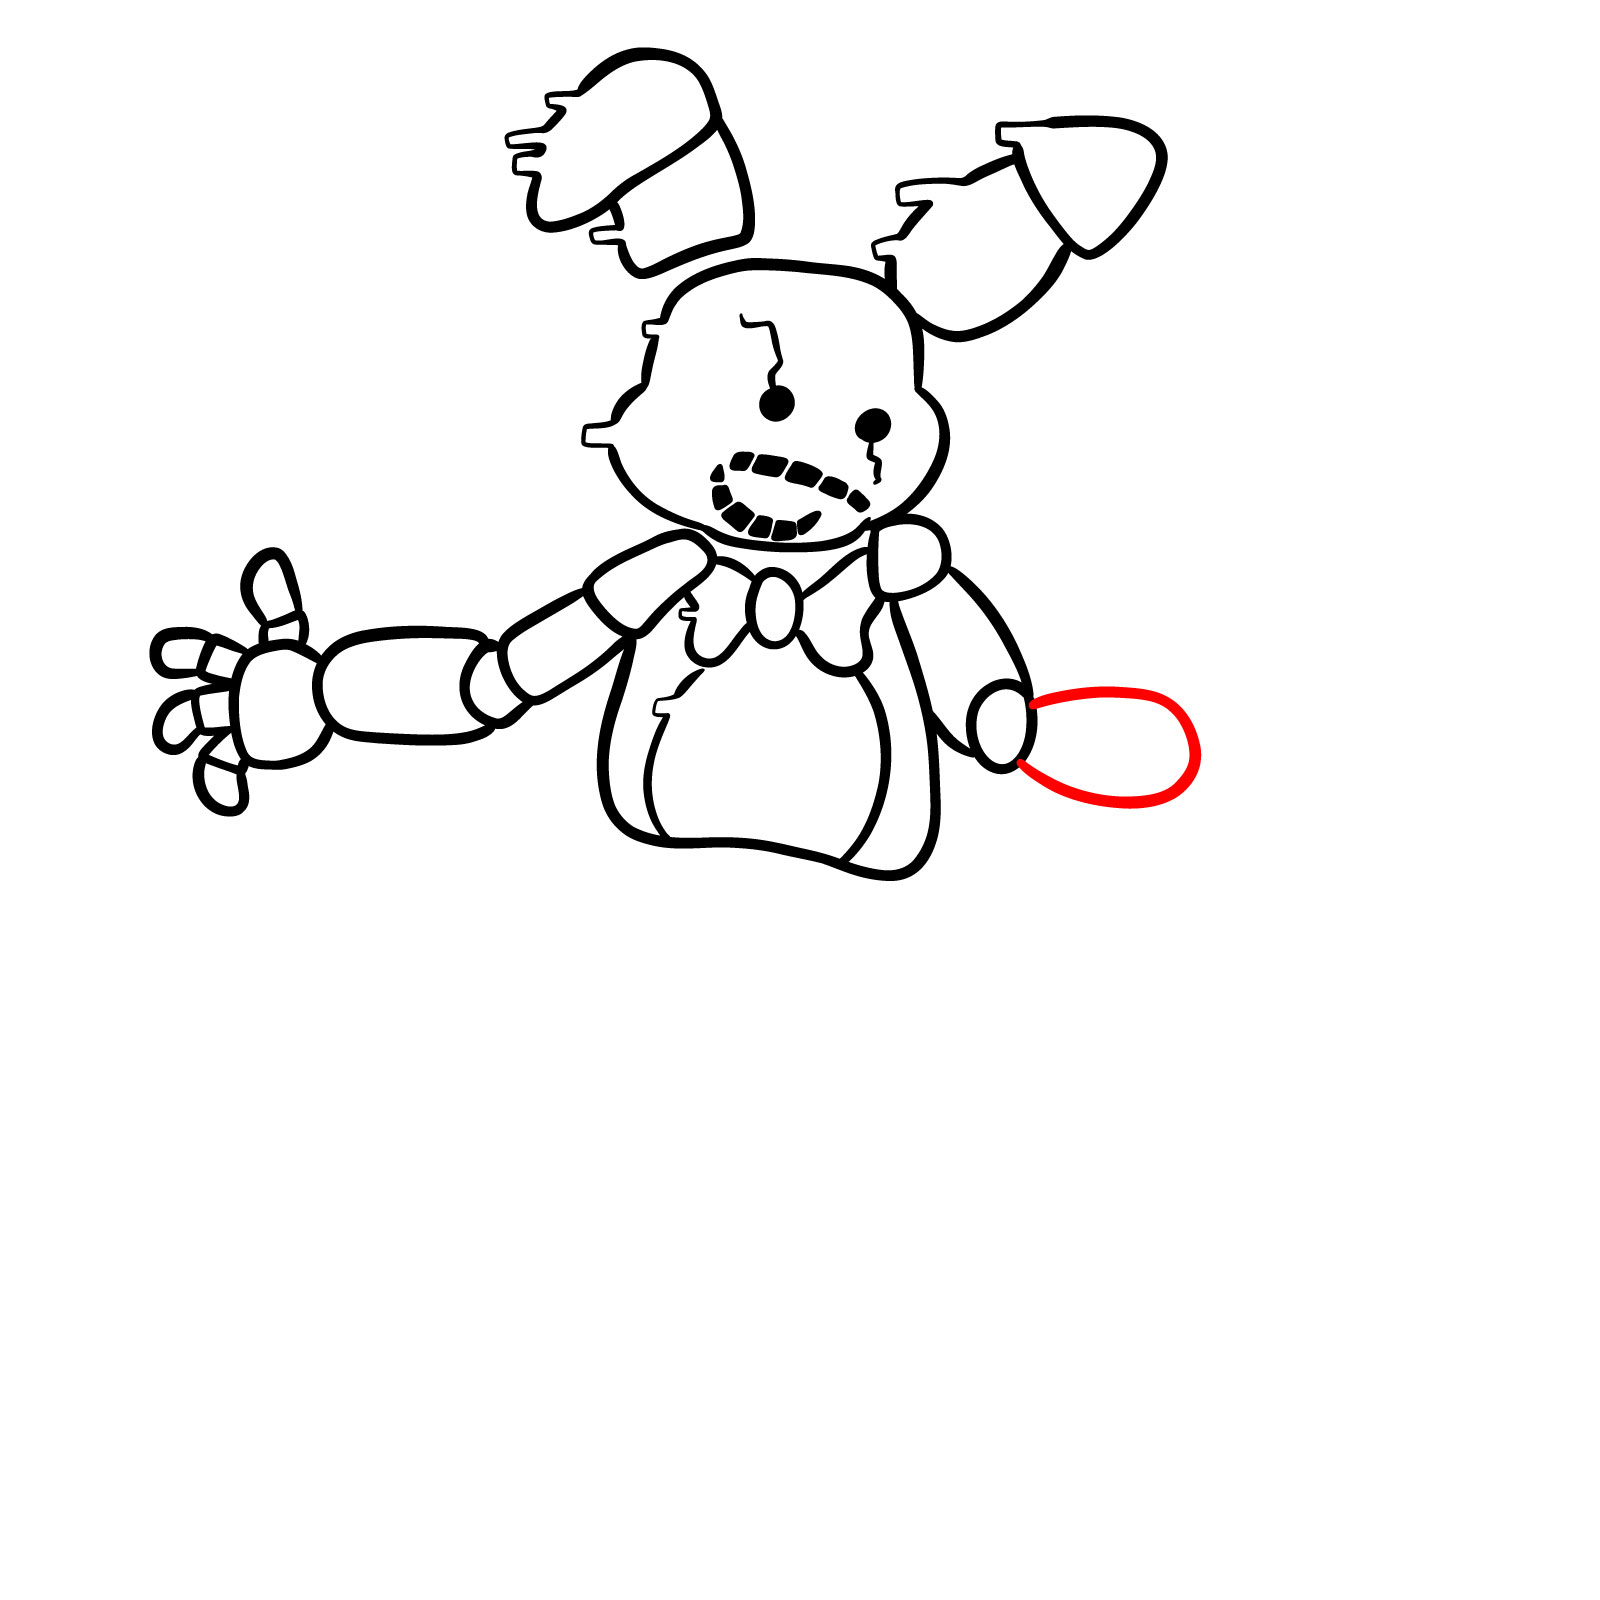 How to draw Shadow Bonnie from FNF: Glitched Legends - step 21